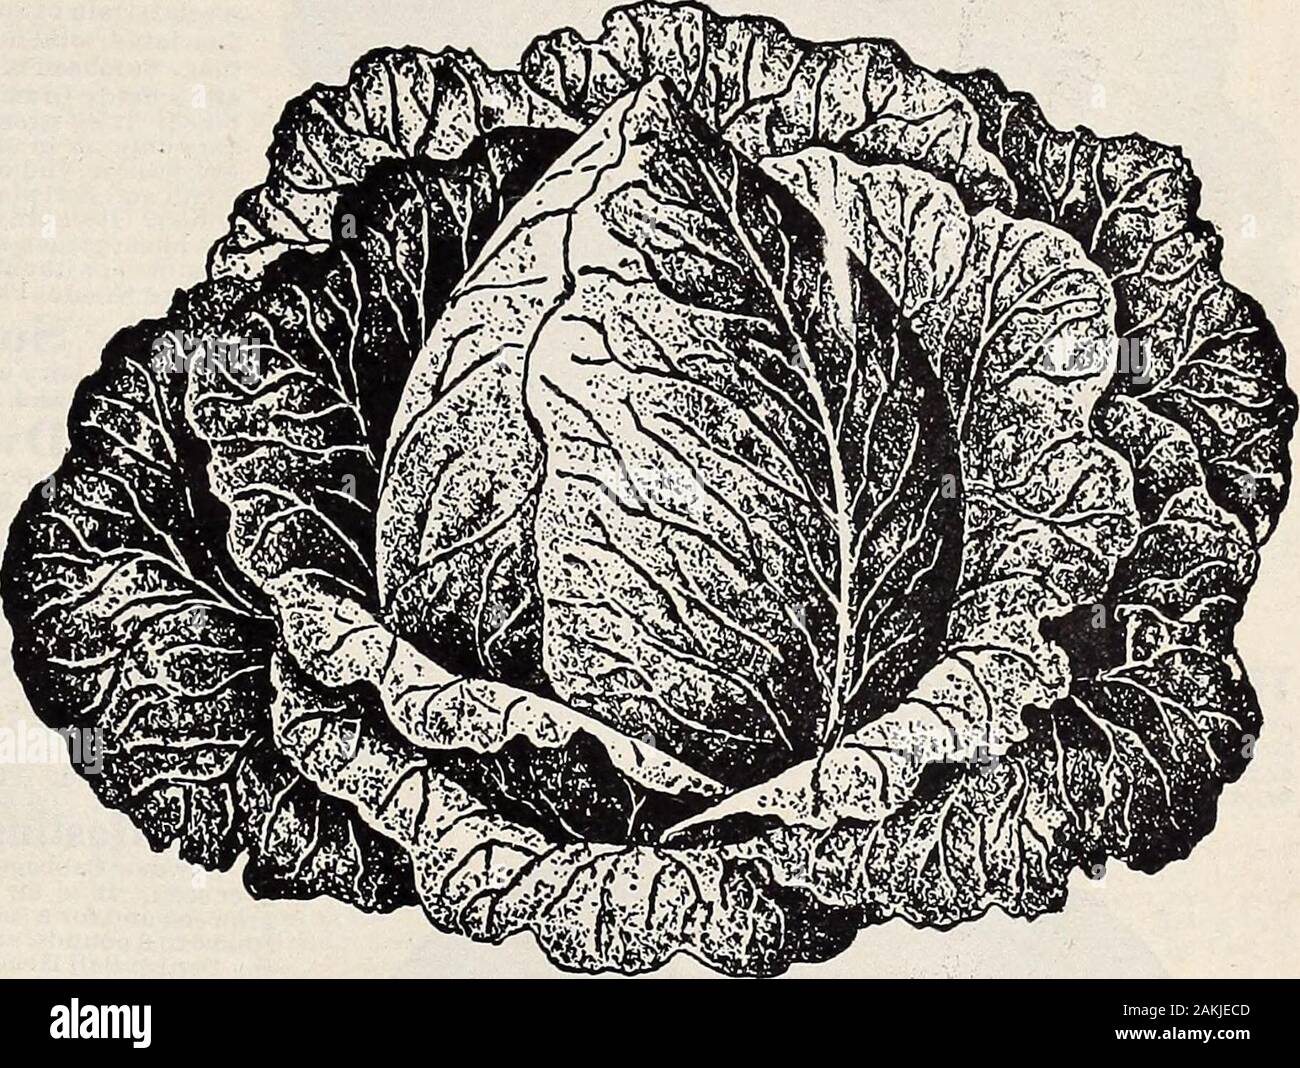 Hastings' seeds : spring 1912 catalogue . Hastings* Florida Drumhead Cabbage Hastings* Centennial Flat Dntch Cabbage Tillsi« the variety shown in the illustration onpage37a*grown by Mr. Cowan. Our best vari-ety of lairge Flat Dutch Catroage. It is a good,reliable header, admirably adapted to all partsof the South. For all-round valuable variety forthe gardener It cannot be excelled. Plant itthis spring. Hastings* Premier Brand Seed.Large pkt., 10c; % oz., 15c; oz., 25c.; % lb., 75c;lb., $2.50.. Hastings* Long Island, the Best Early Pointed CabbageT F ,. j • ,* f7I,1 „ T»A Earliest and best of Stock Photo